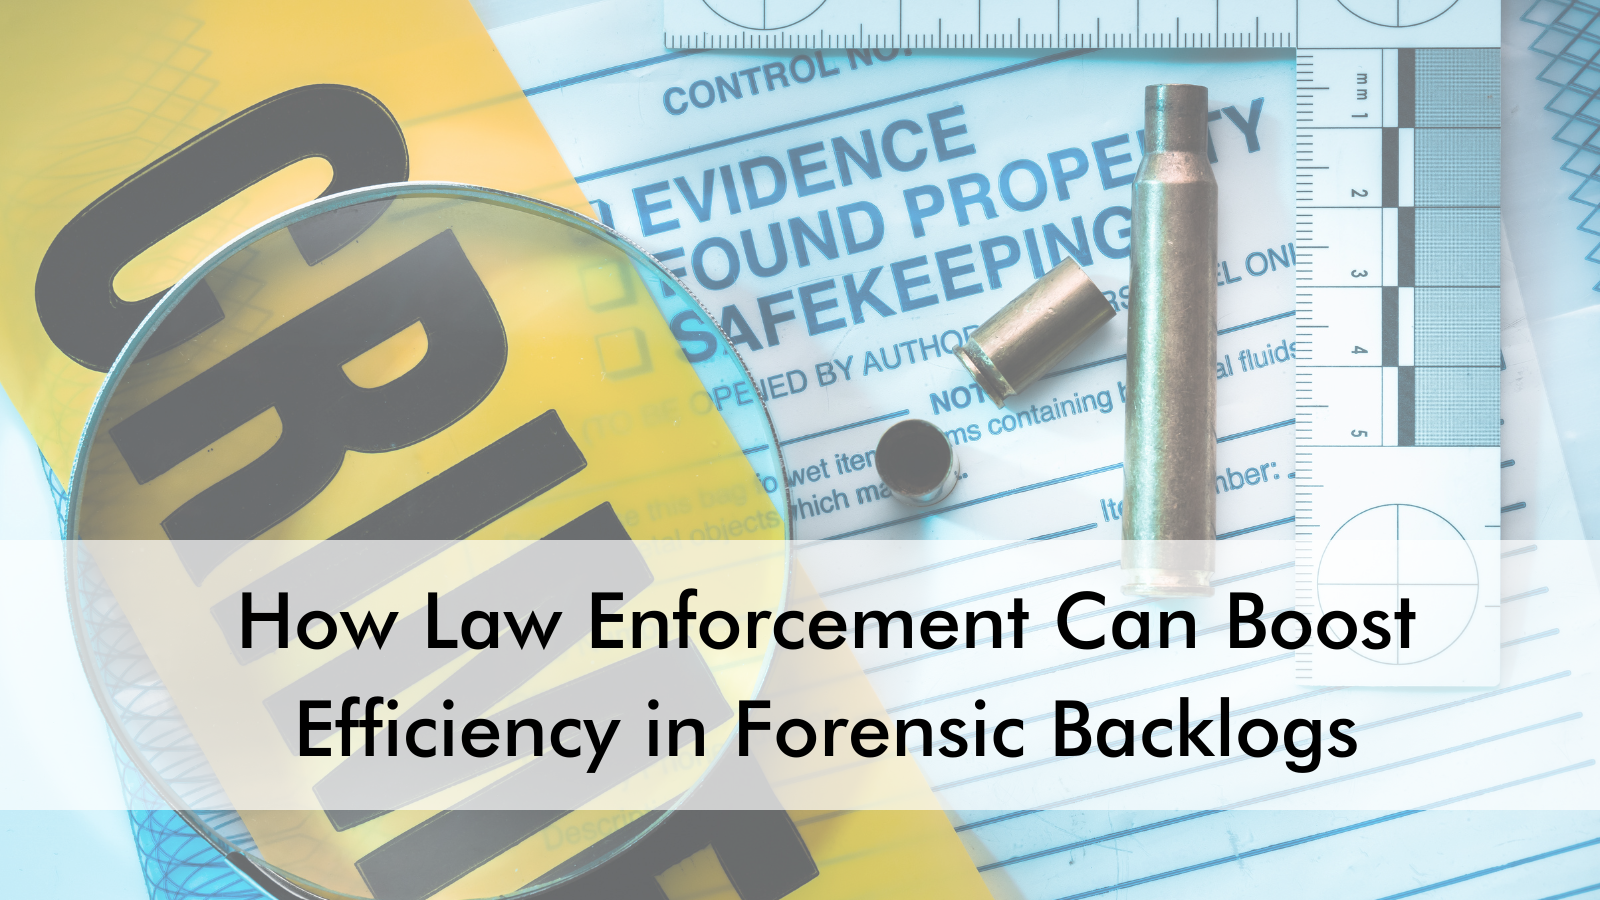 Reducing Forensic Backlog: How Law Enforcement Can Improve Efficiency